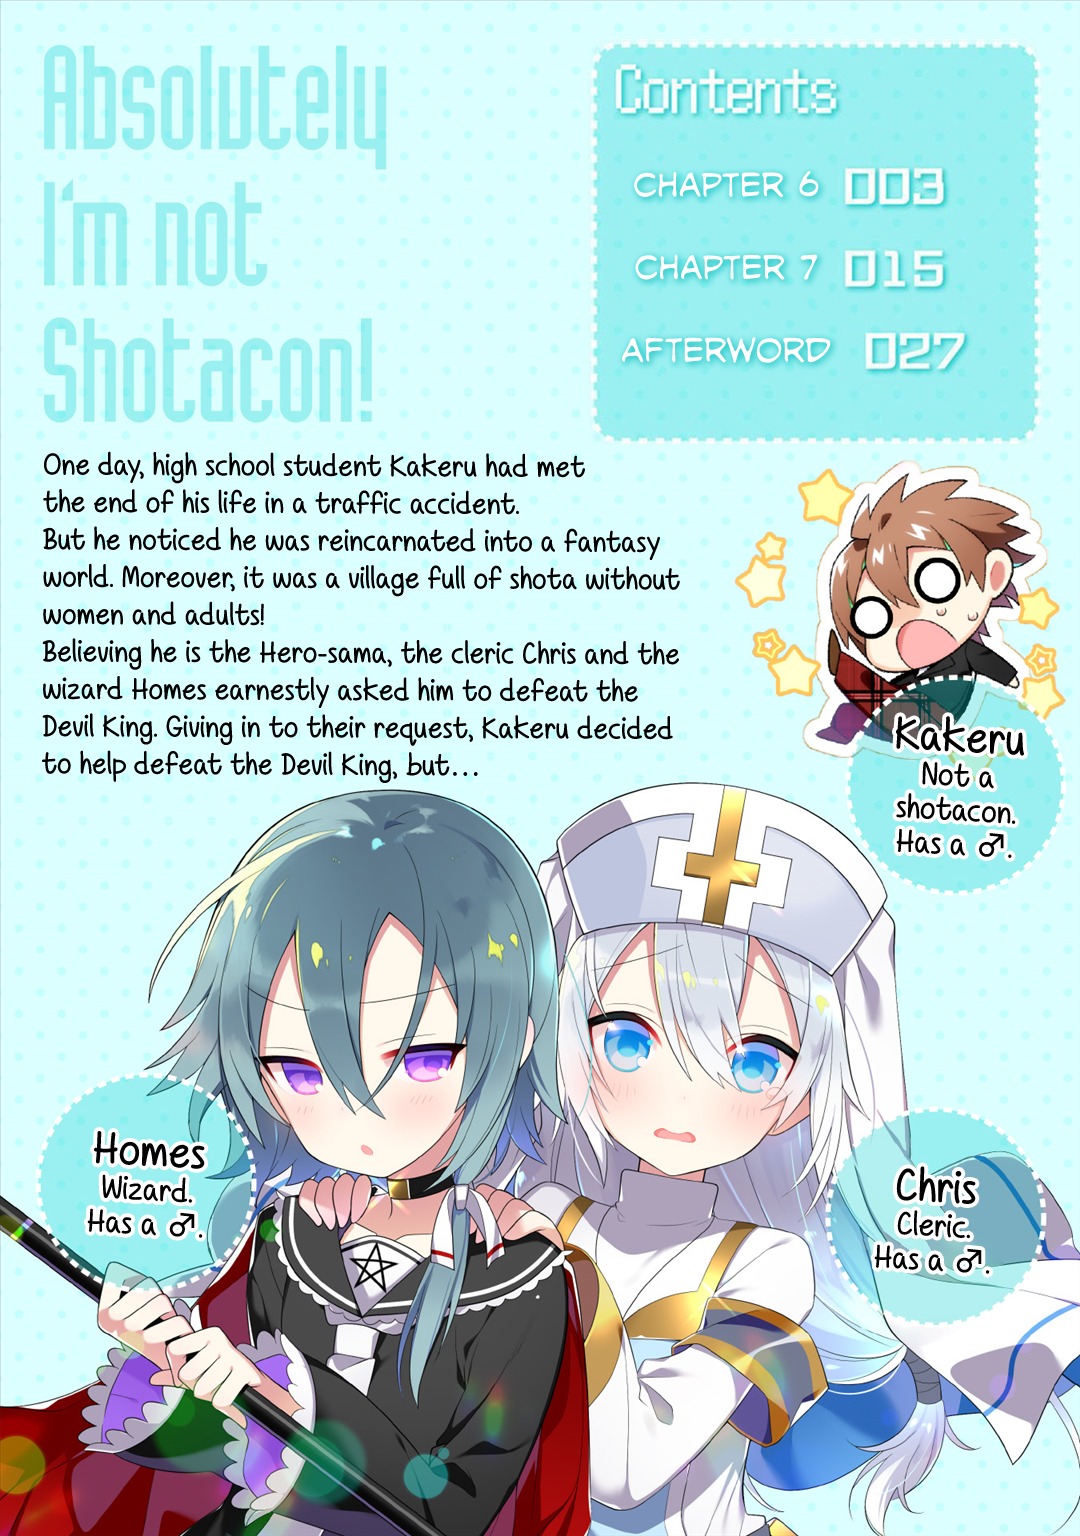 After Reincarnation, My Party Was Full Of Traps, But I'm Not A Shotacon! ch.6